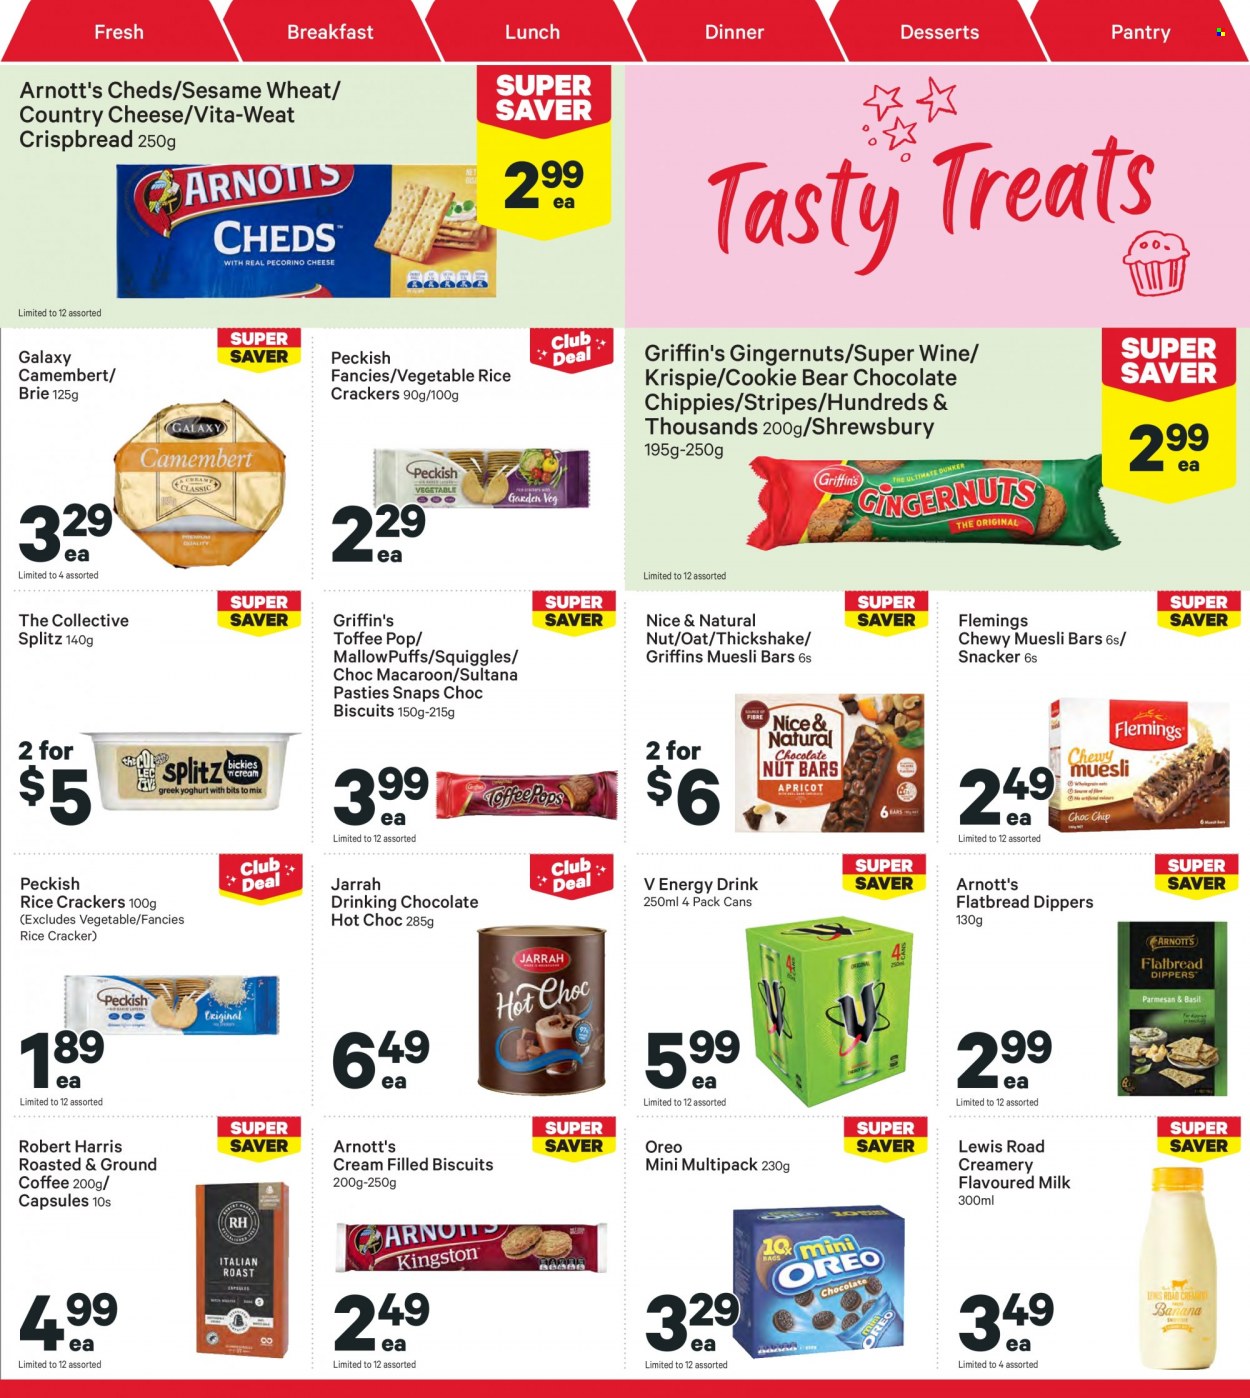 thumbnail - New World mailer - 20.03.2023 - 26.03.2023 - Sales products - flatbread, crispbread, camembert, cheese, brie, Oreo, milk, flavoured milk, toffee, crackers, biscuit, MallowPuffs, Griffin's, rice crackers, oats, Harris, muesli bar, muesli, energy drink, hot chocolate, coffee, ground coffee, wine. Page 25.